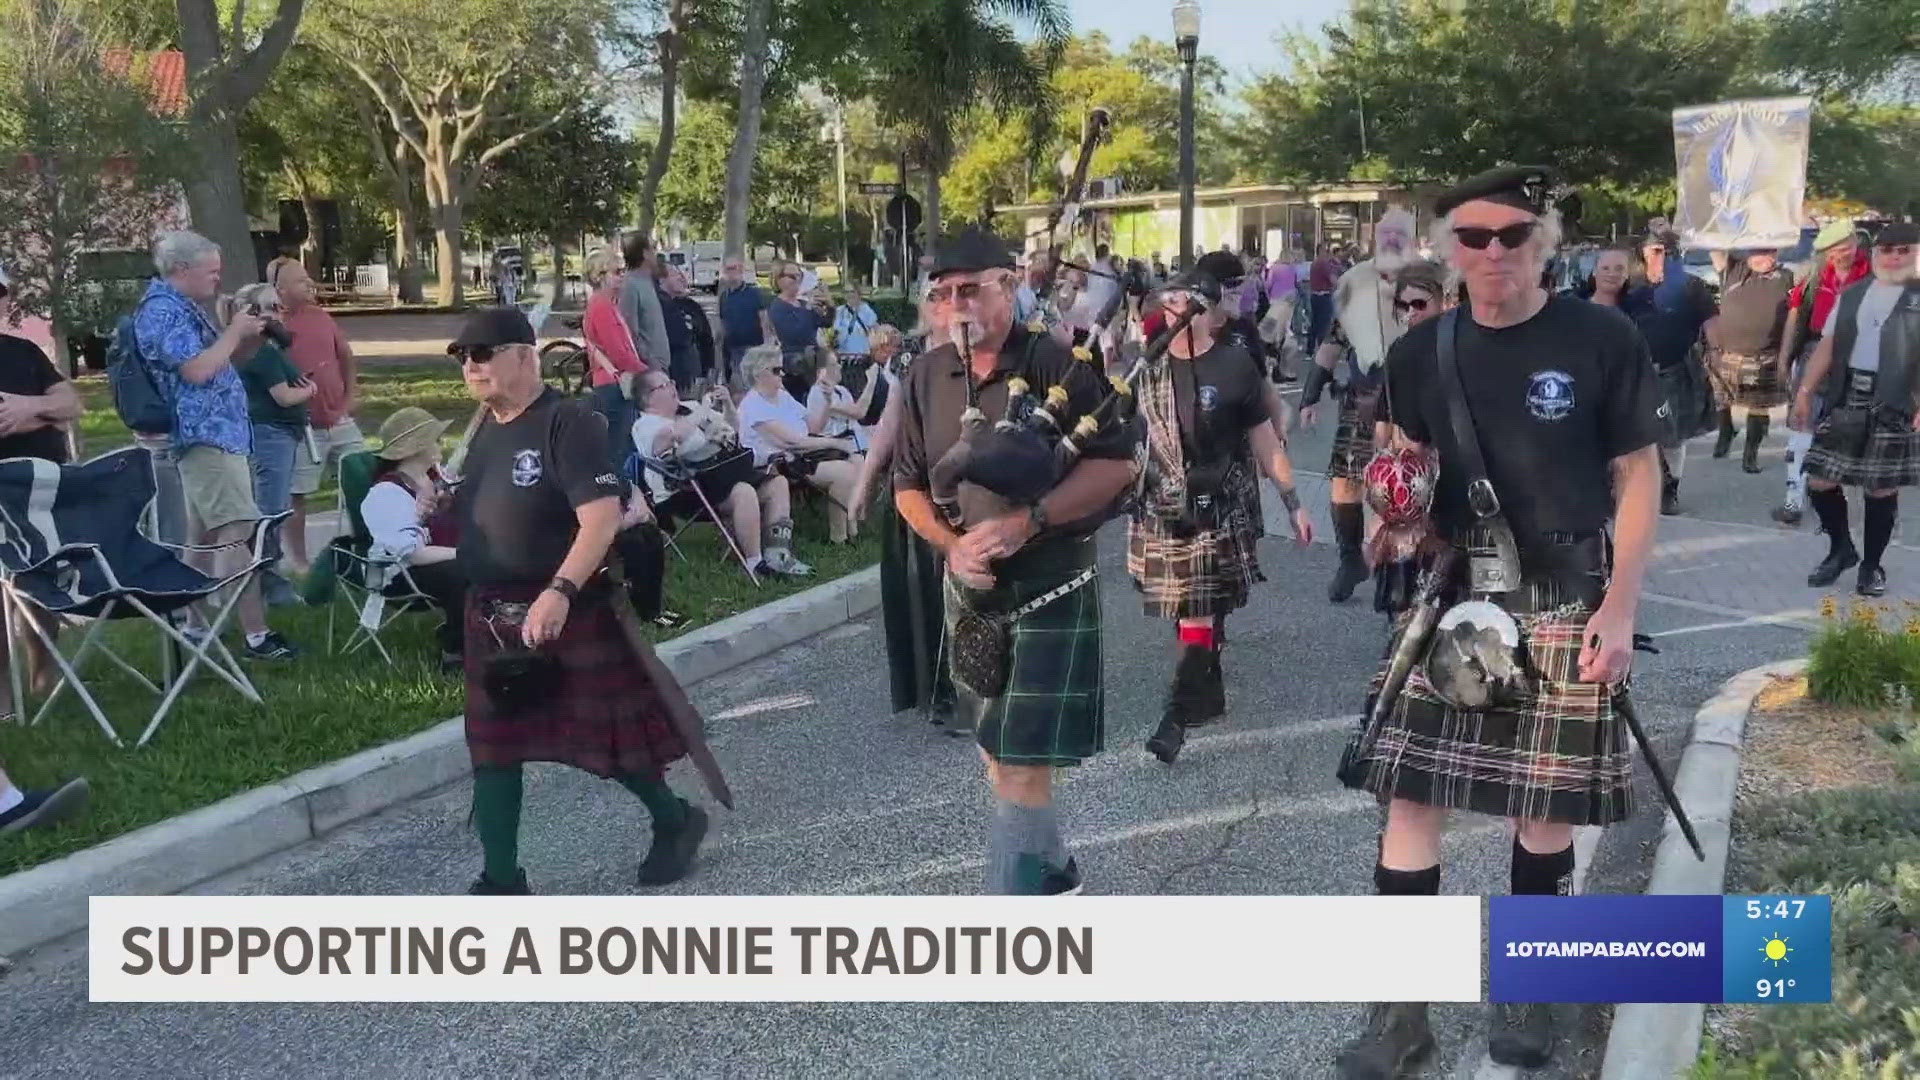 A local charity supports this "Bonnie" heritage.